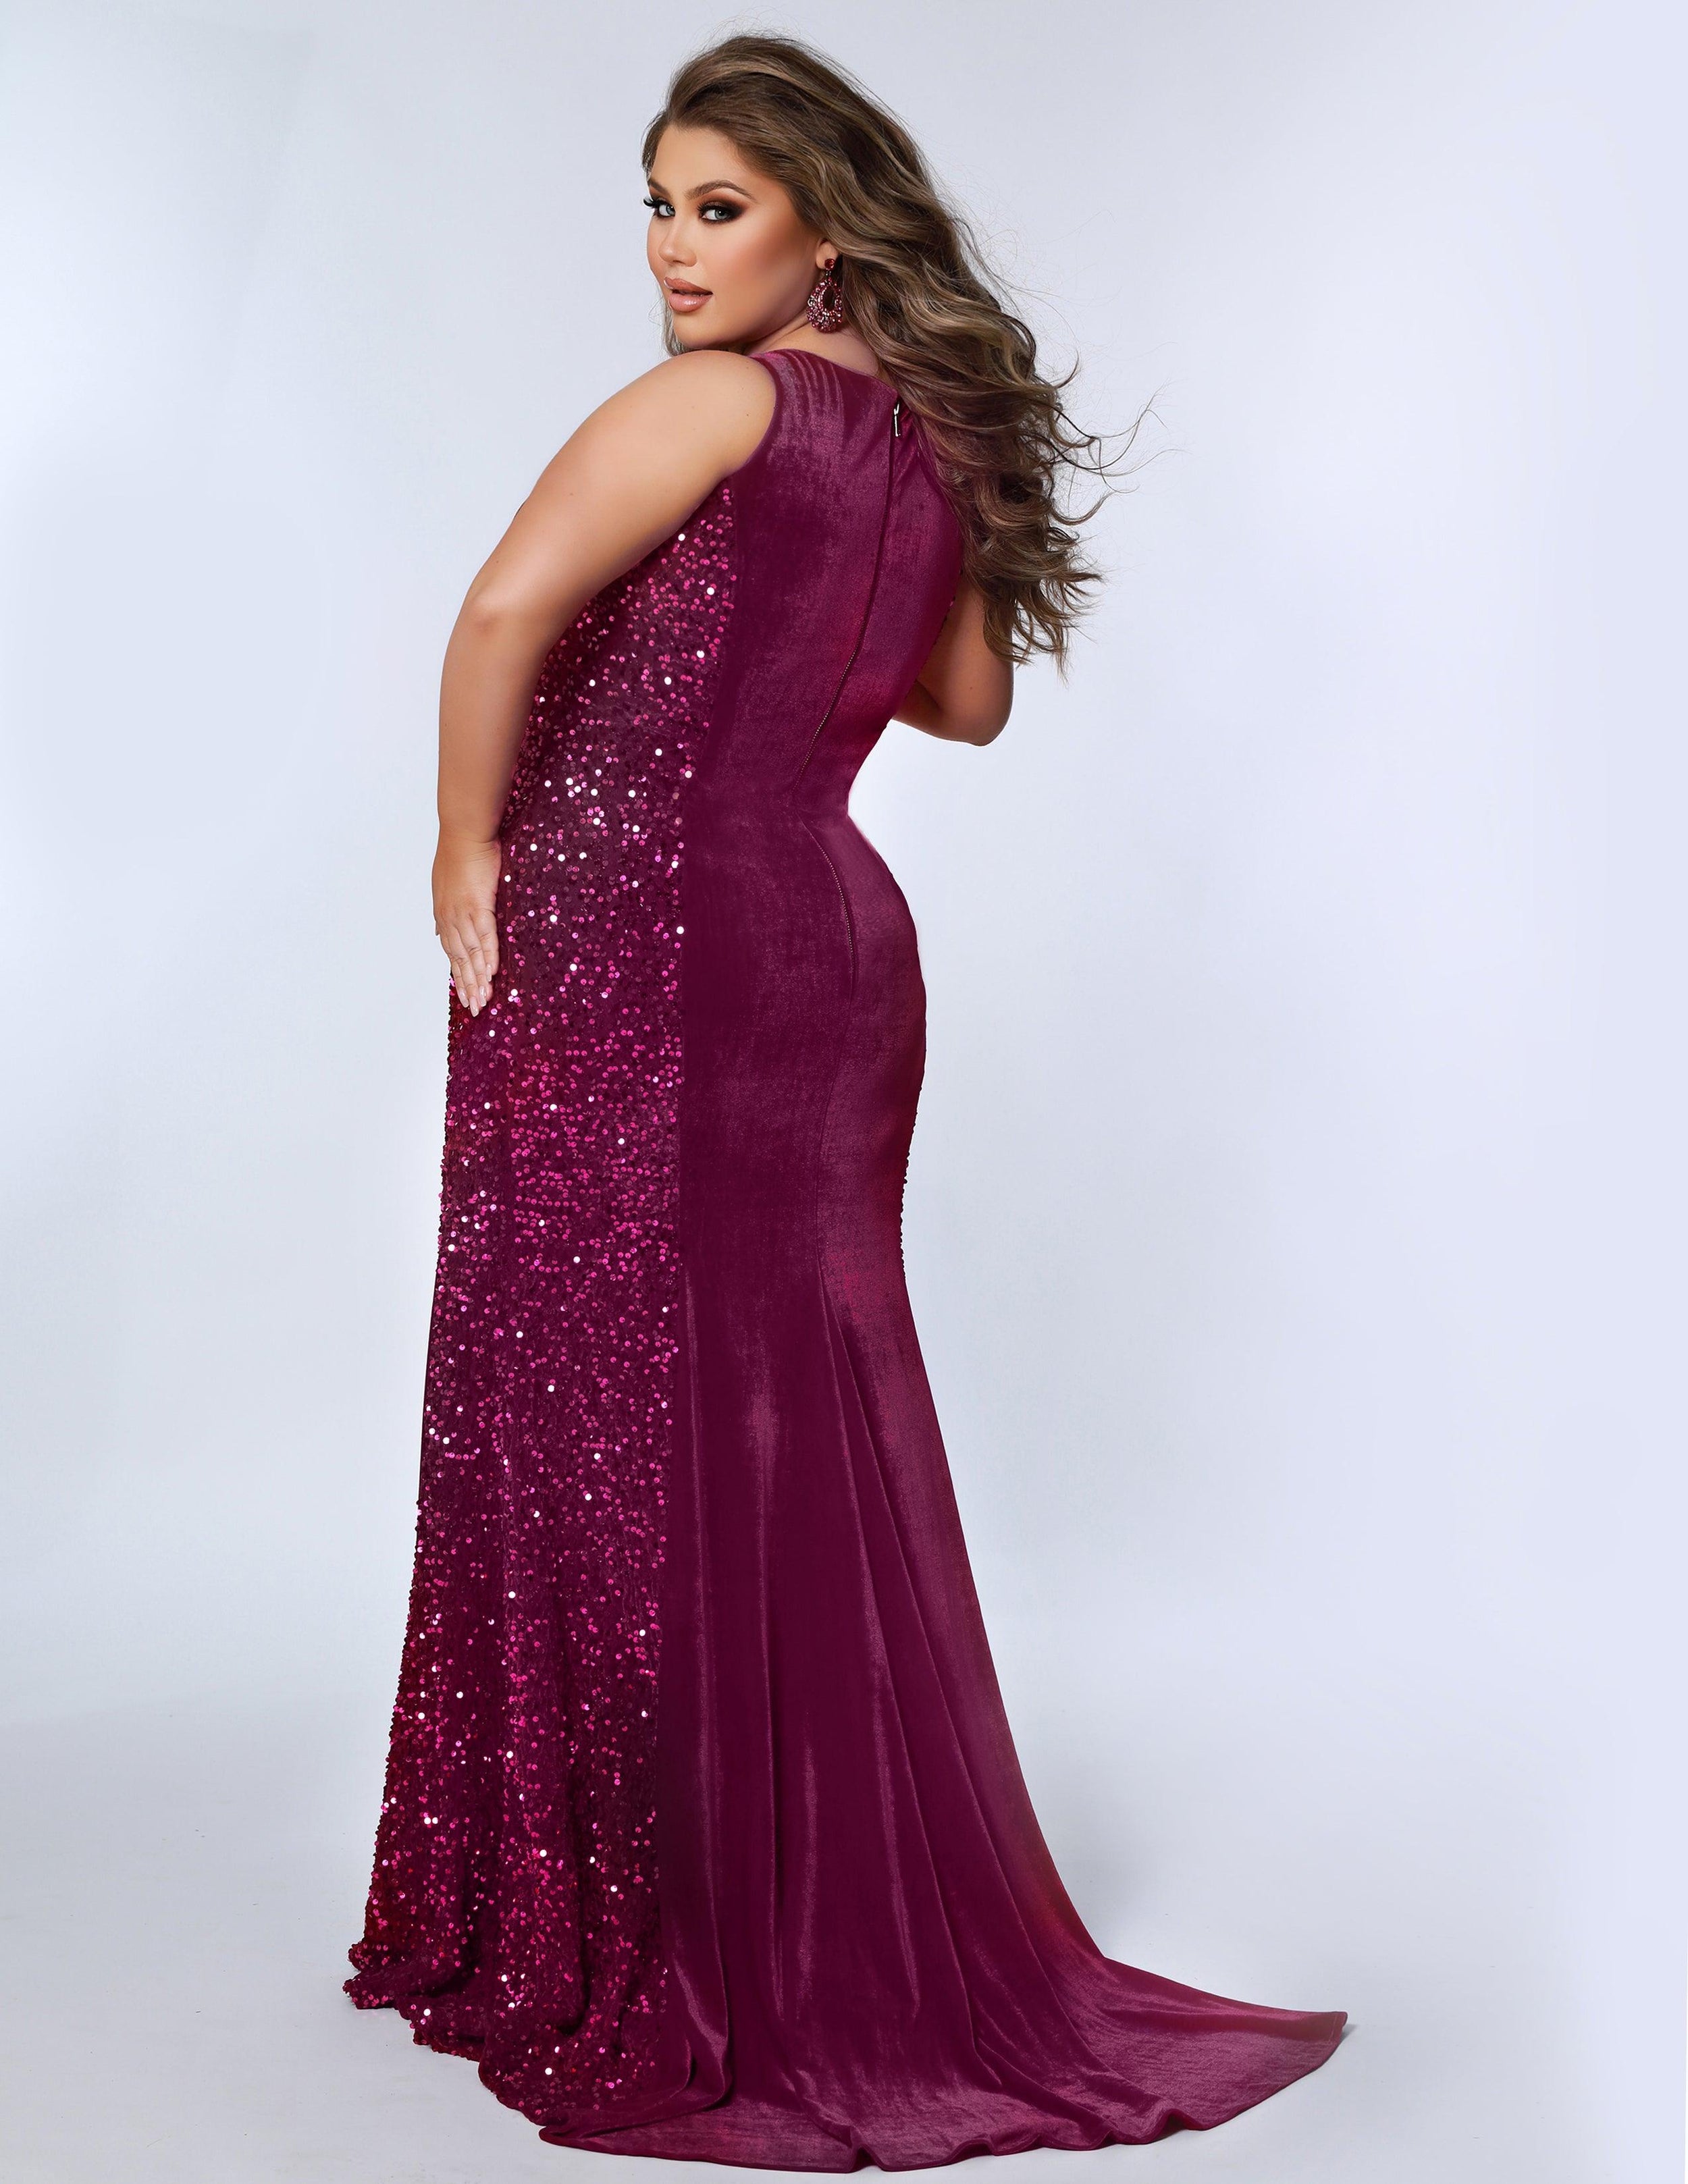 Formal Dresses Long Sleevelesss Plus Size Formal Evening Gown Magenta